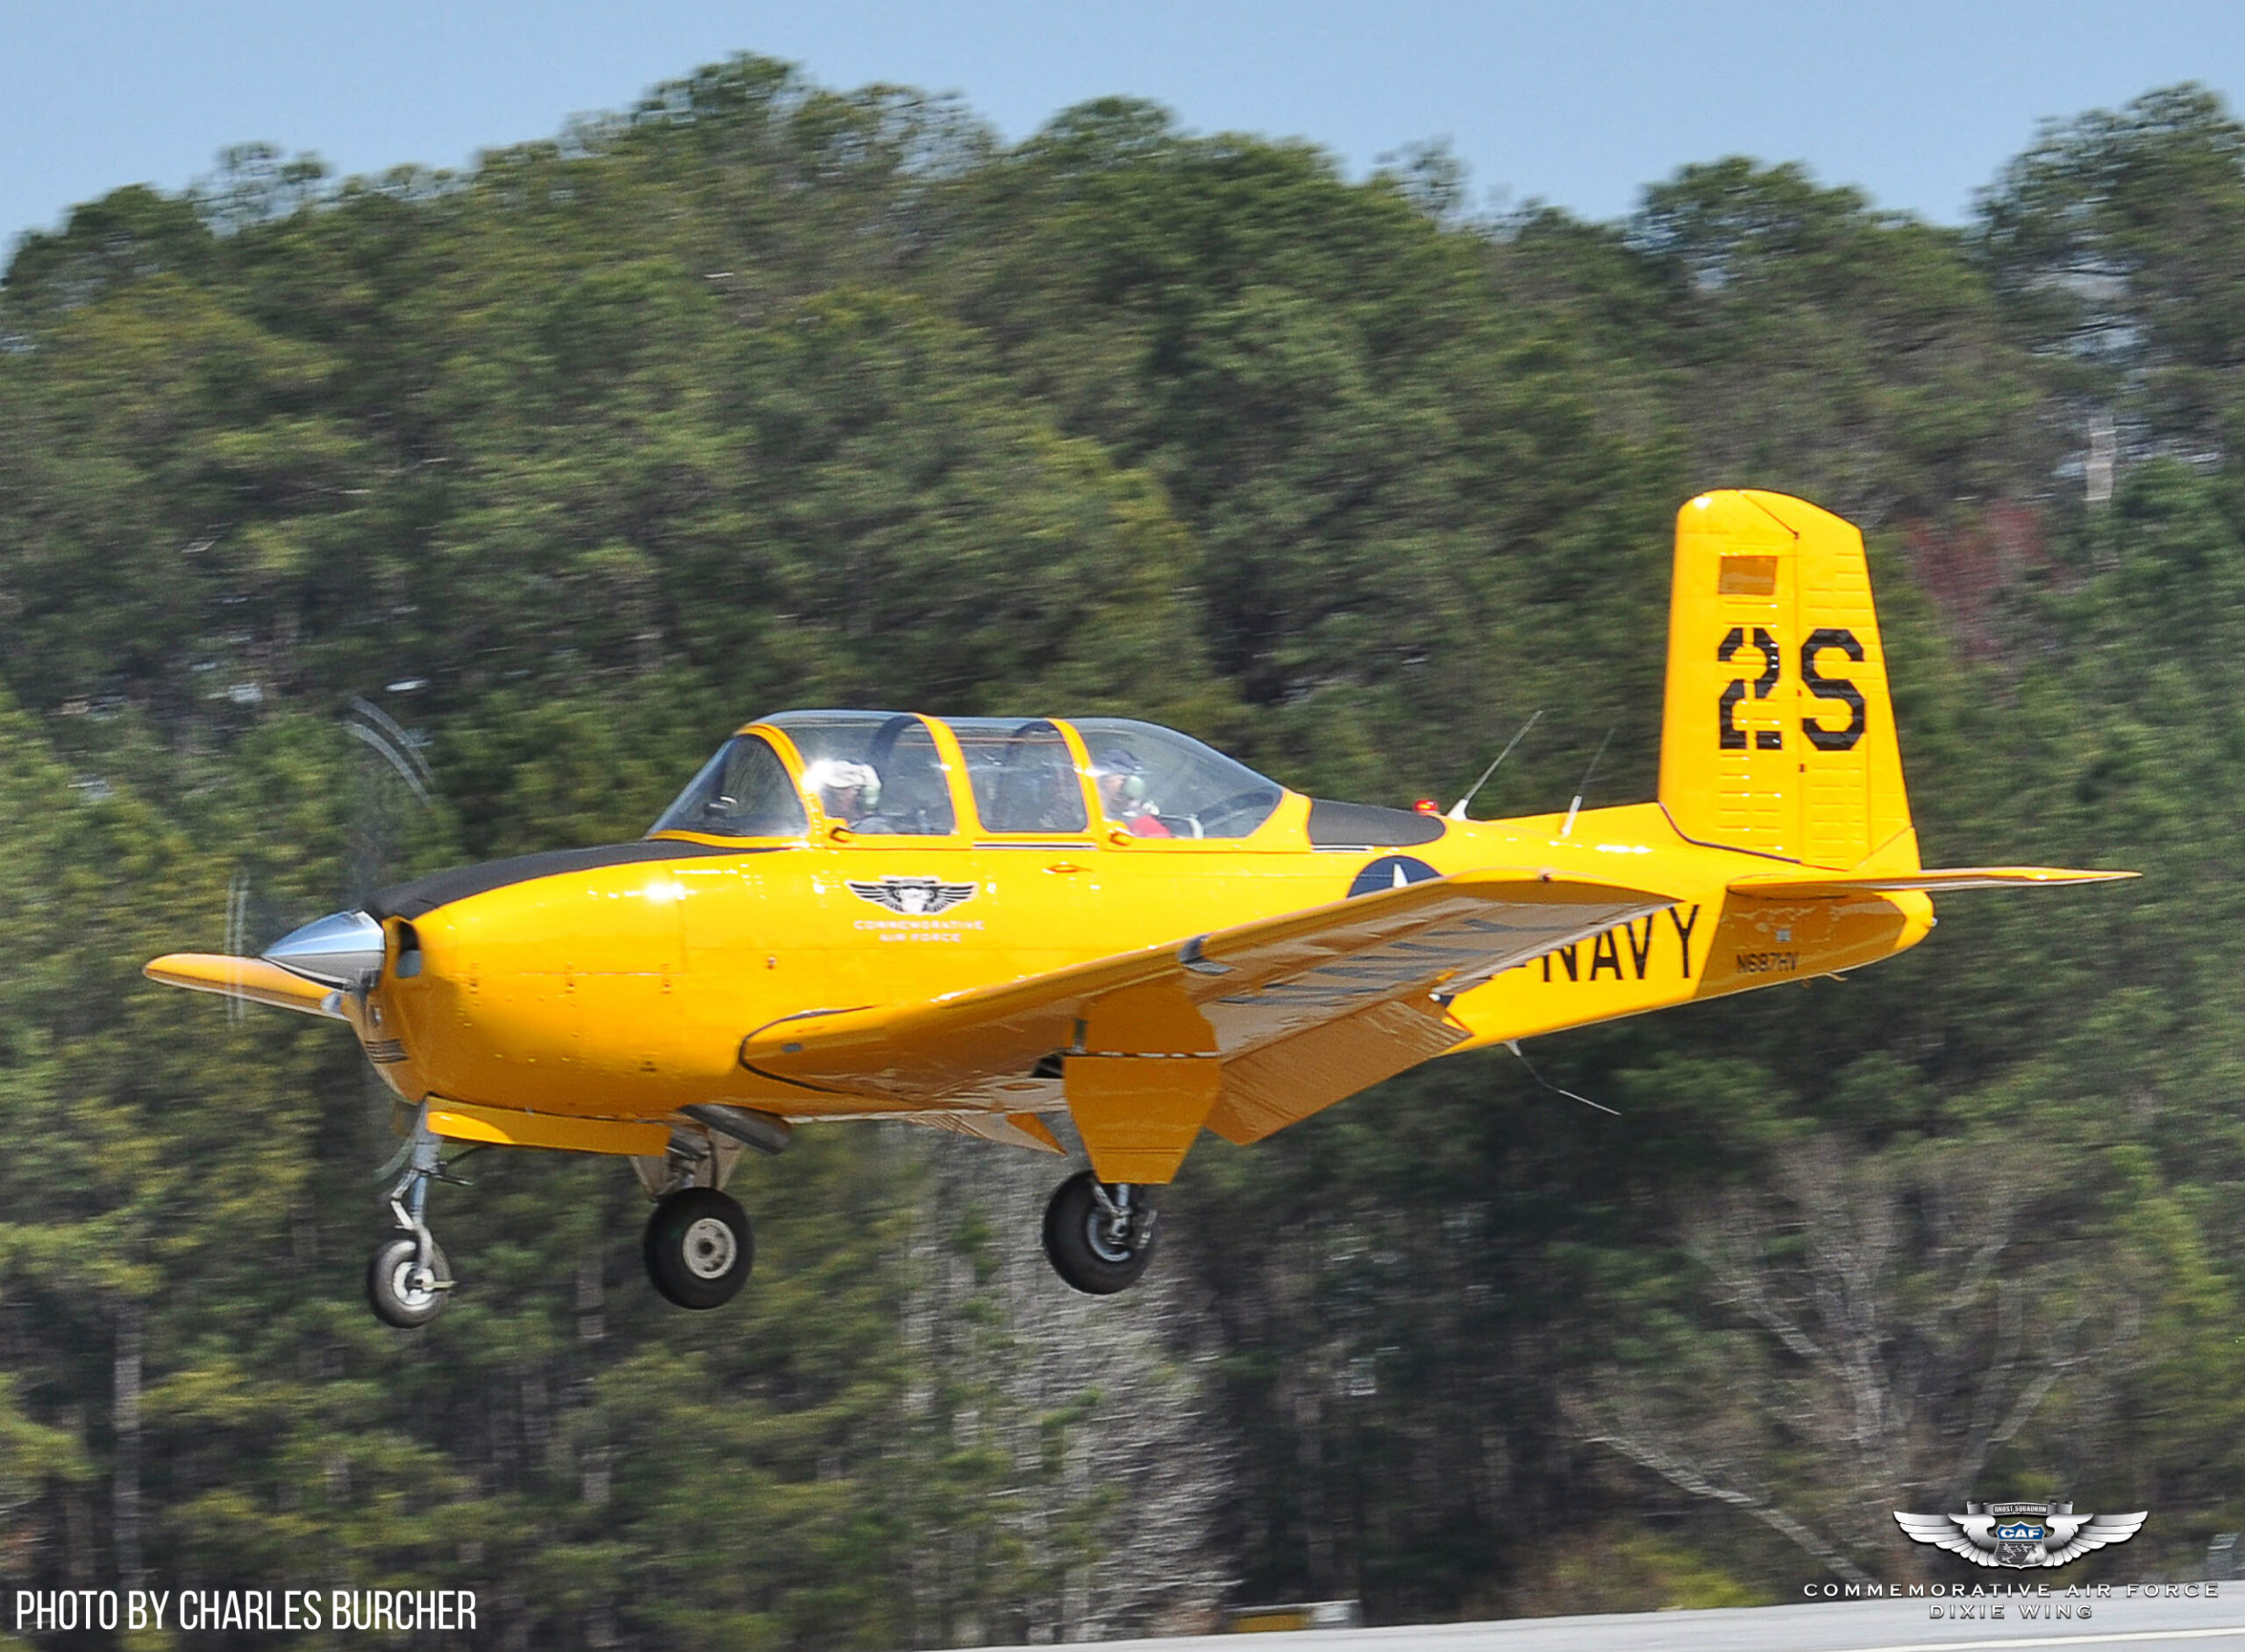 https://airbasegeorgia.org/wp-content/uploads/2022/02/T-34-Flight-back-from-Delta_Photo-by-Charles-Burcher_DSC_7295-WM-scaled.jpg